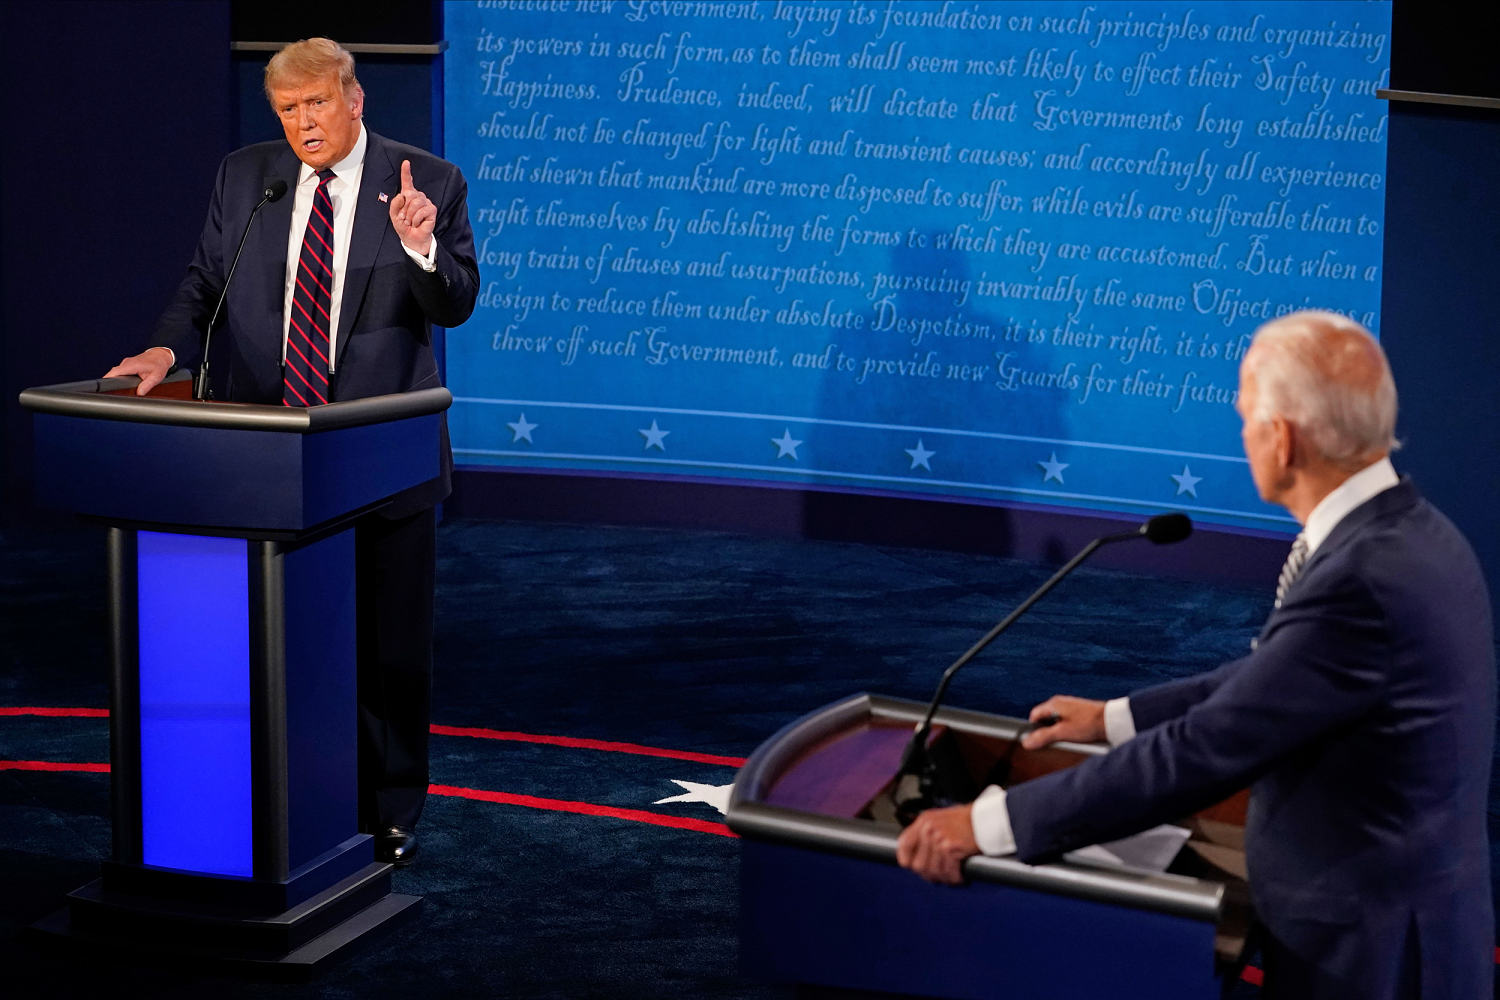 As debate plans take shape, Trump flubs the expectations game (again)